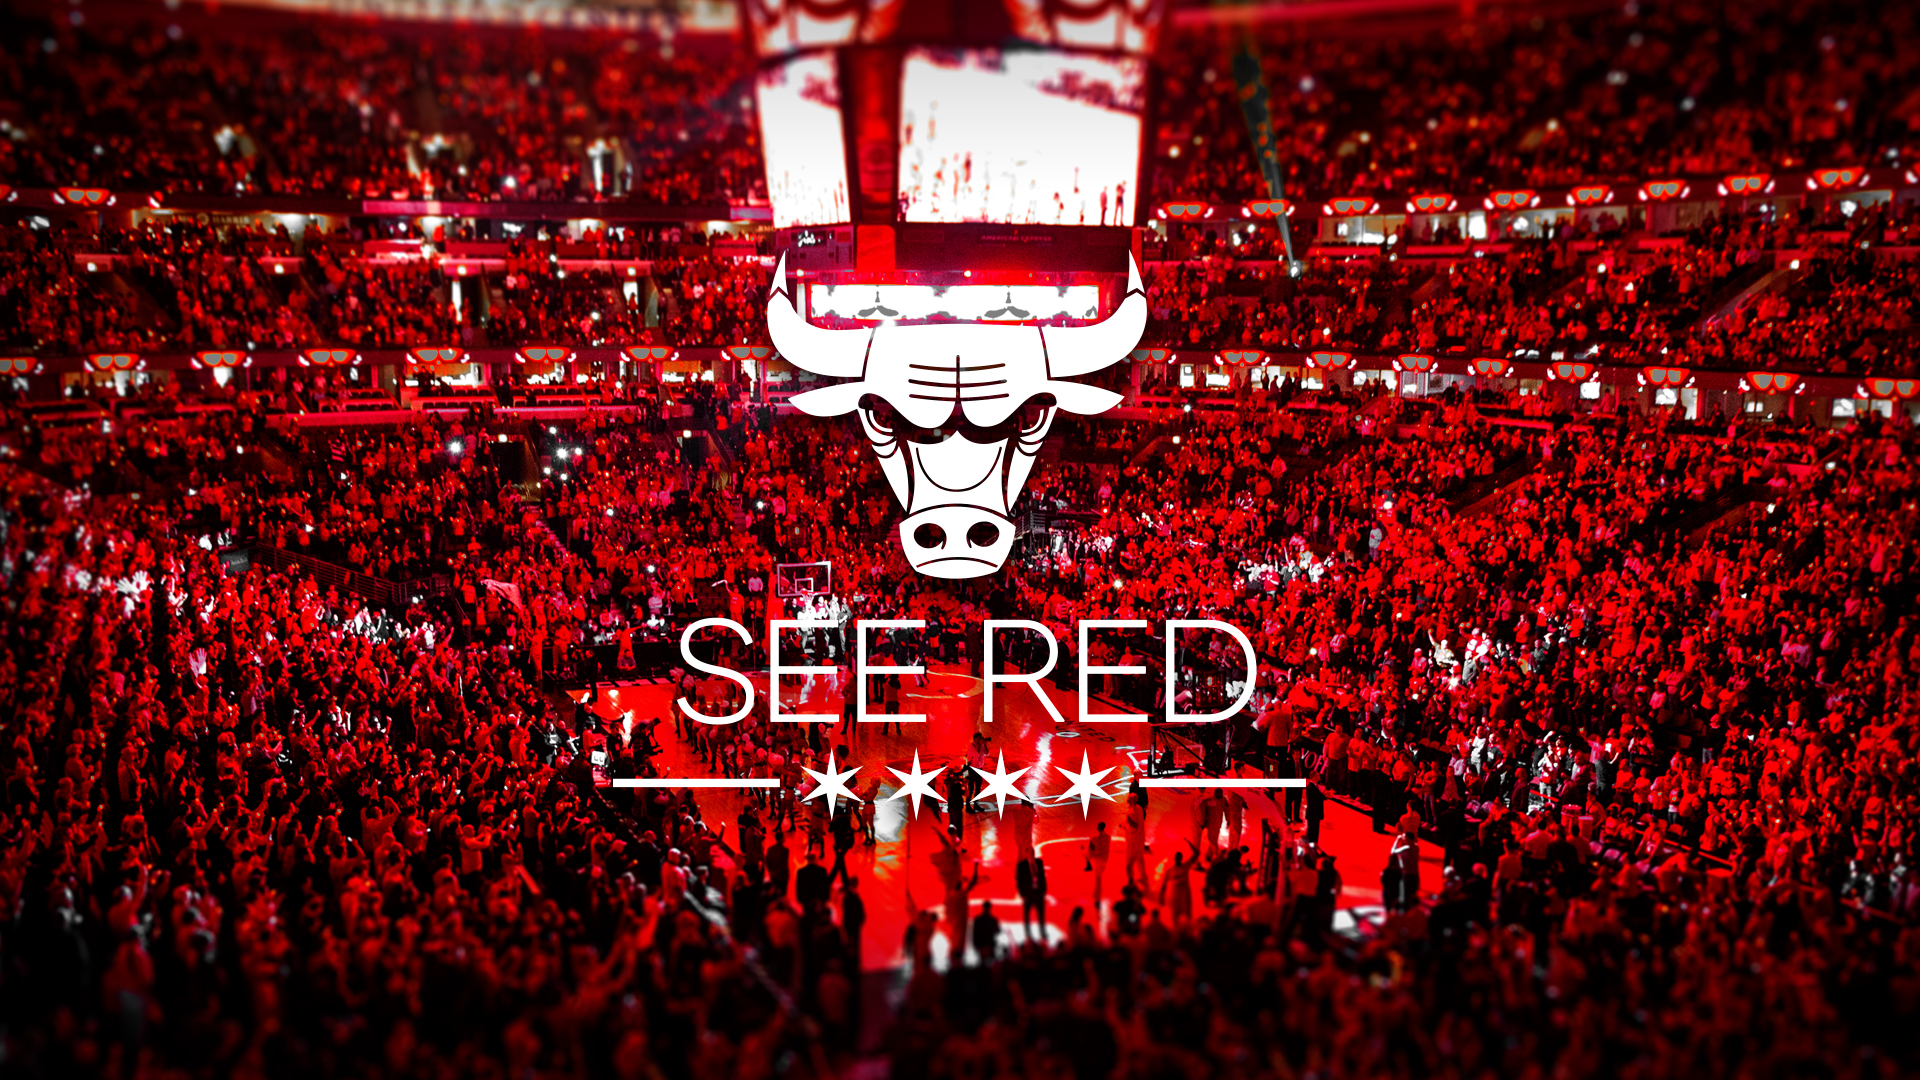 Chicago Bulls Wallpaper See Red